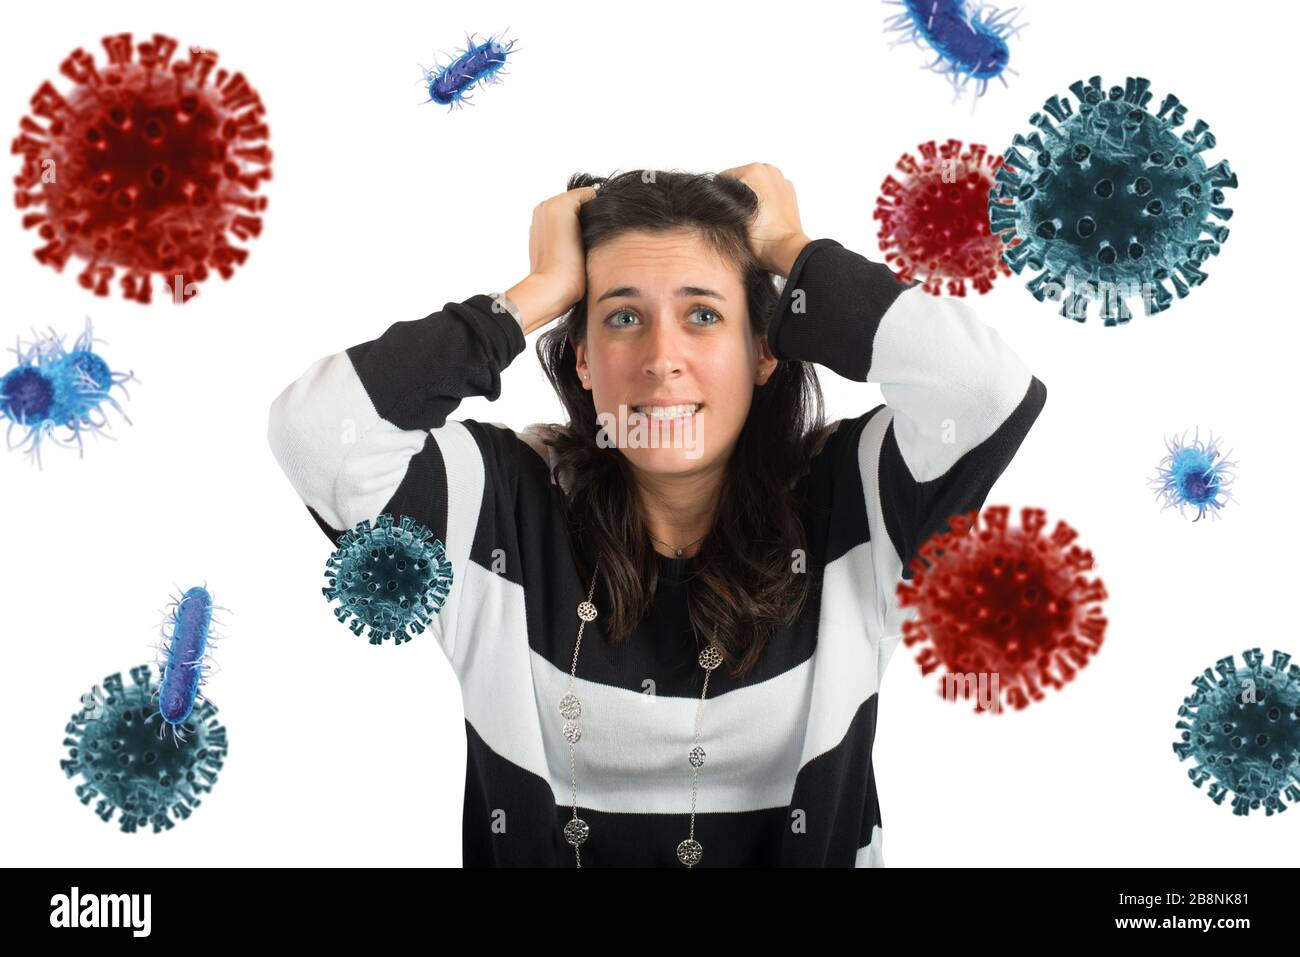 Feared girl attacked by viruses and bacteria. Concept of illness Stock Photo